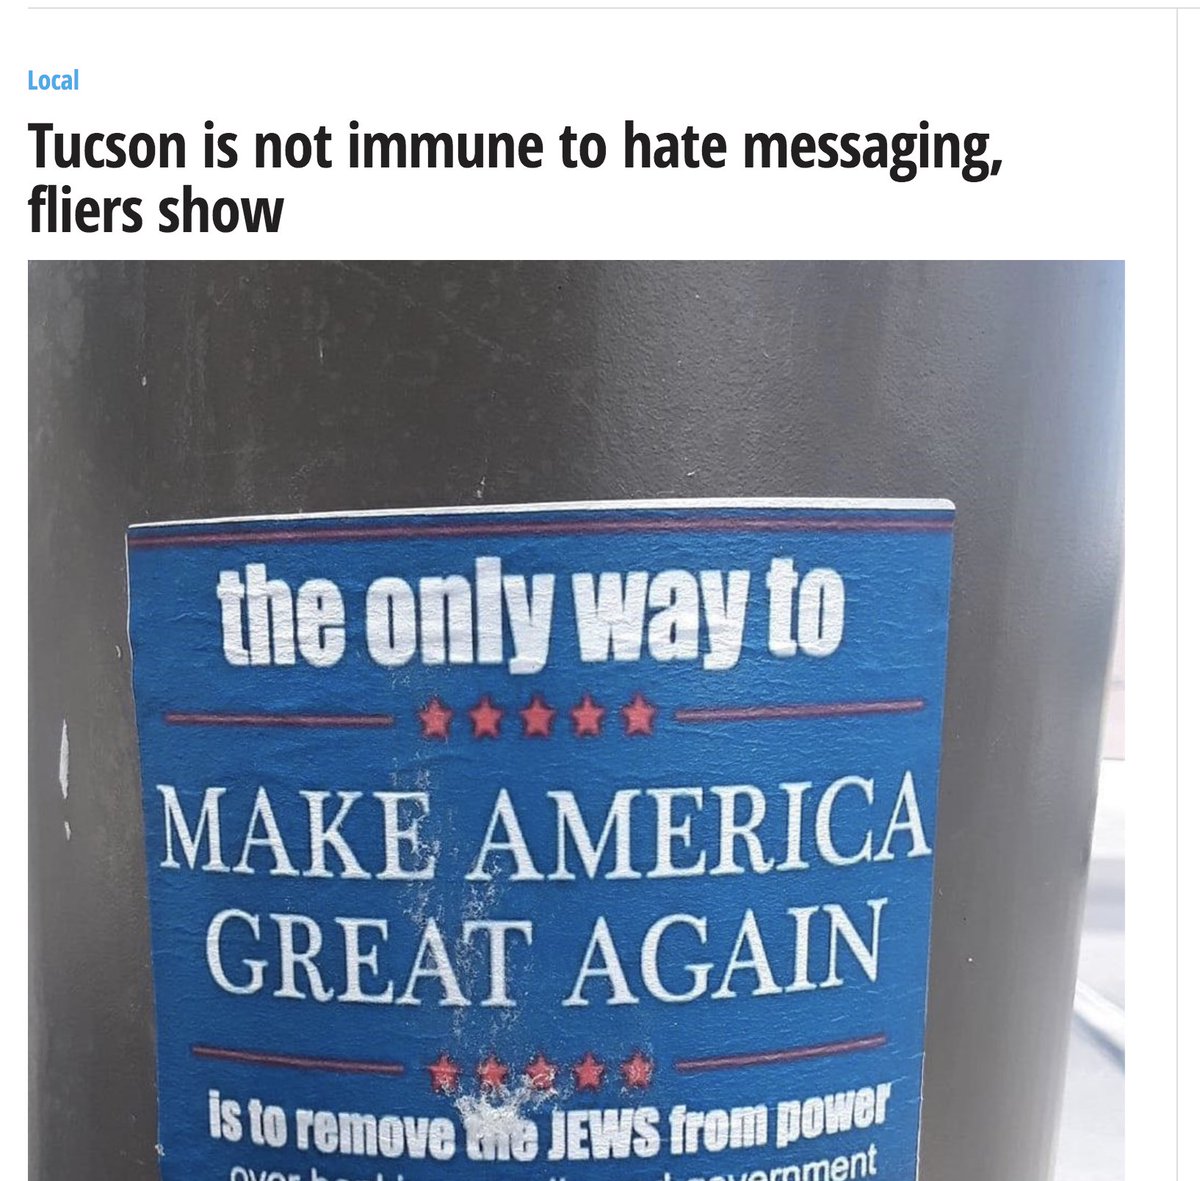 In the past, Sean and his crew mainly seem to have showed up in the AZ news in the form of their anonymous postering campaigns.Here's Sean taking credit for this Nazi postering campaign reported by the Arizona Jewish Post back in August 2019.